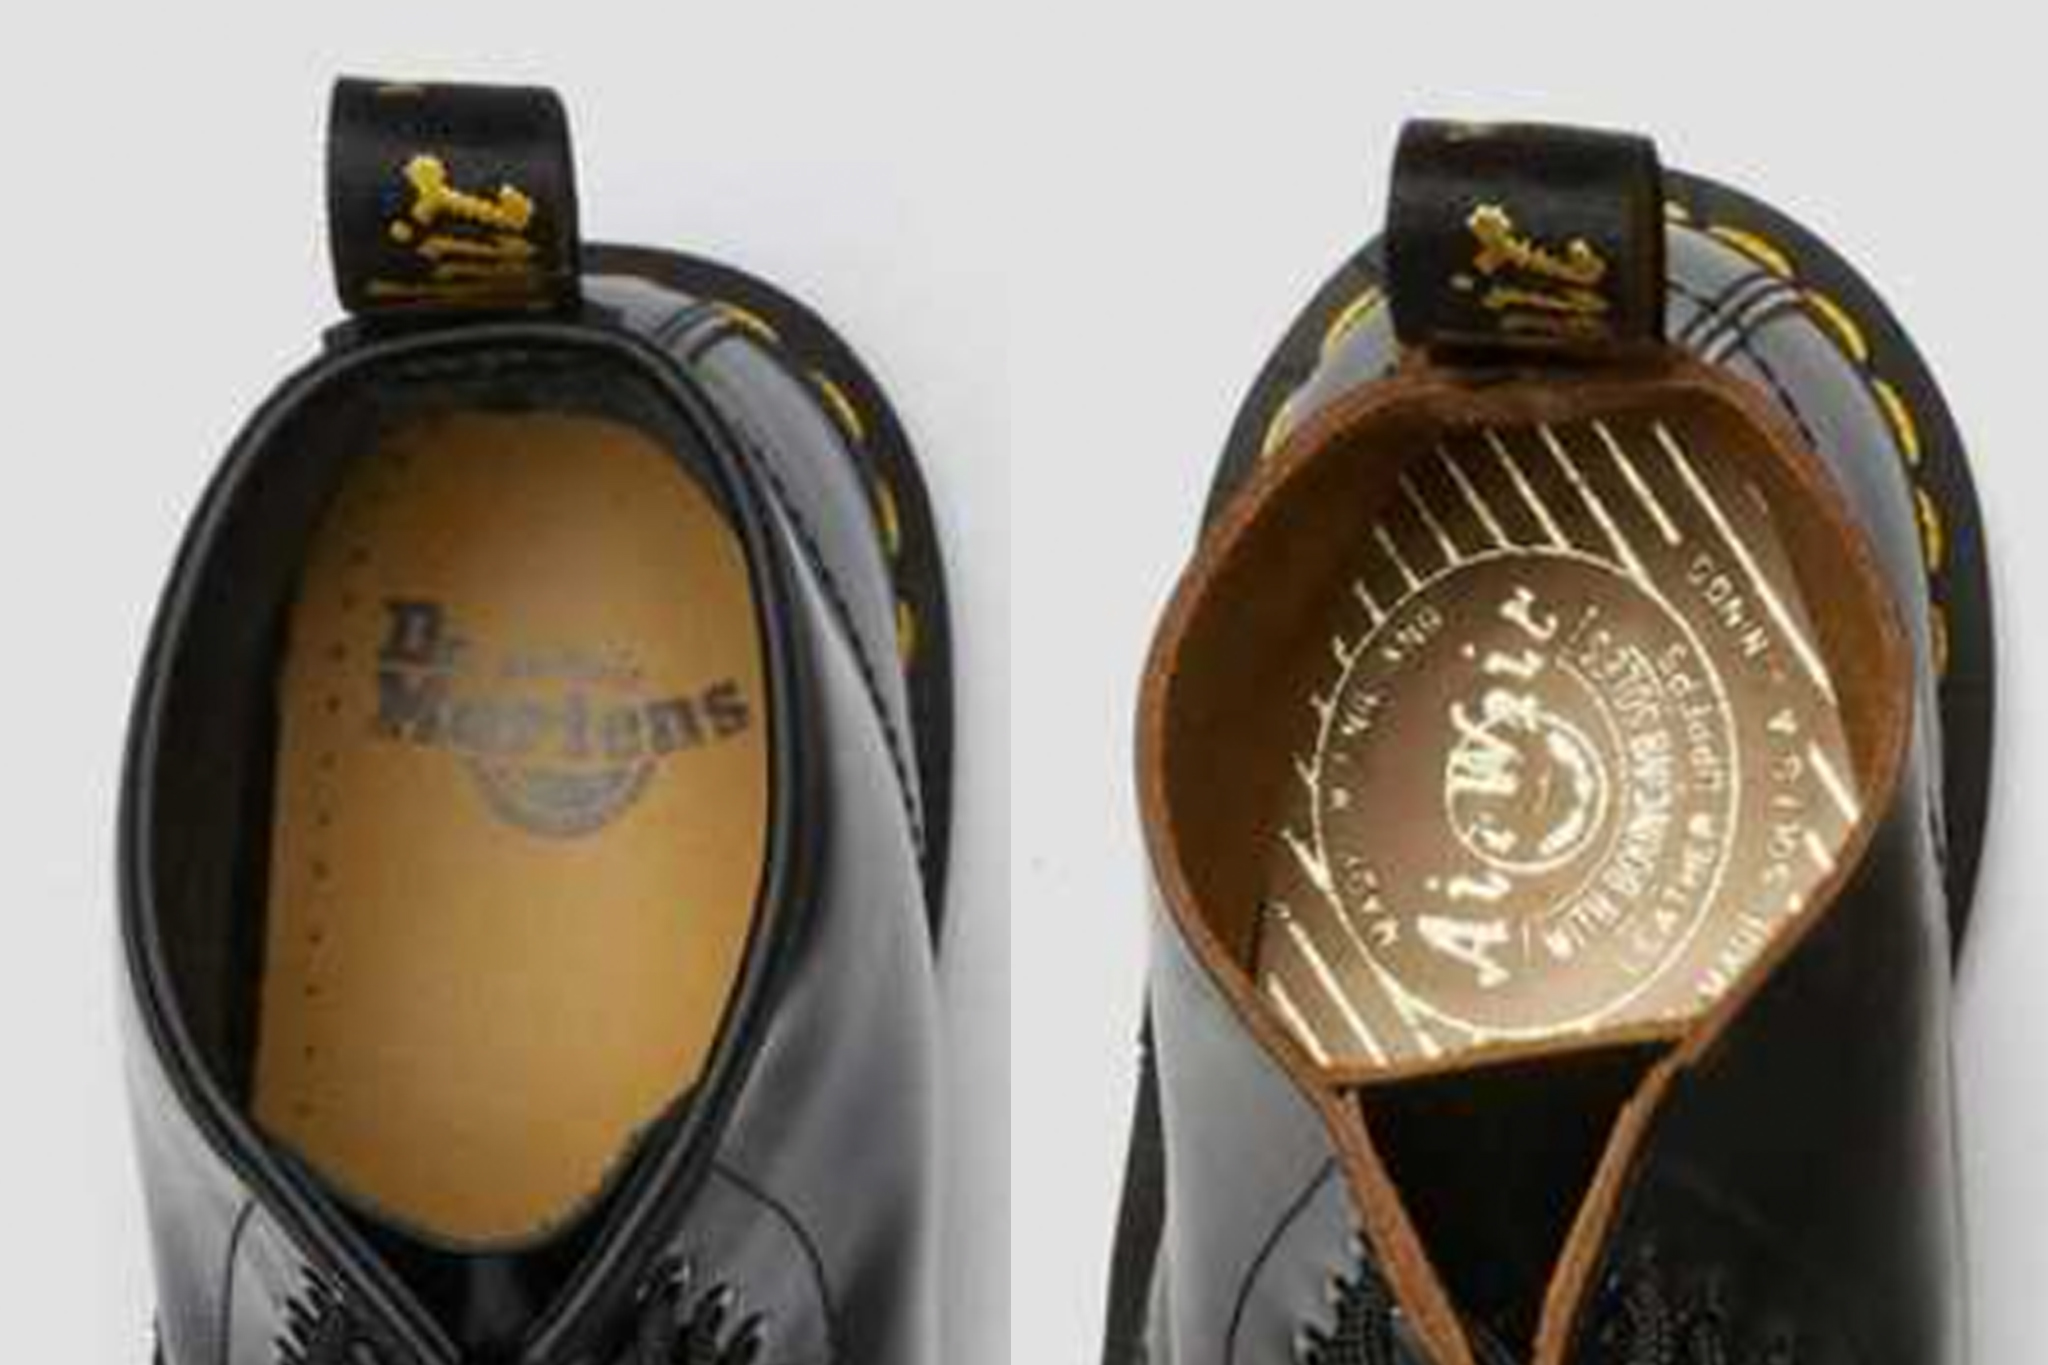 Dr. Martens Originals vs. Made in England: What's the difference?